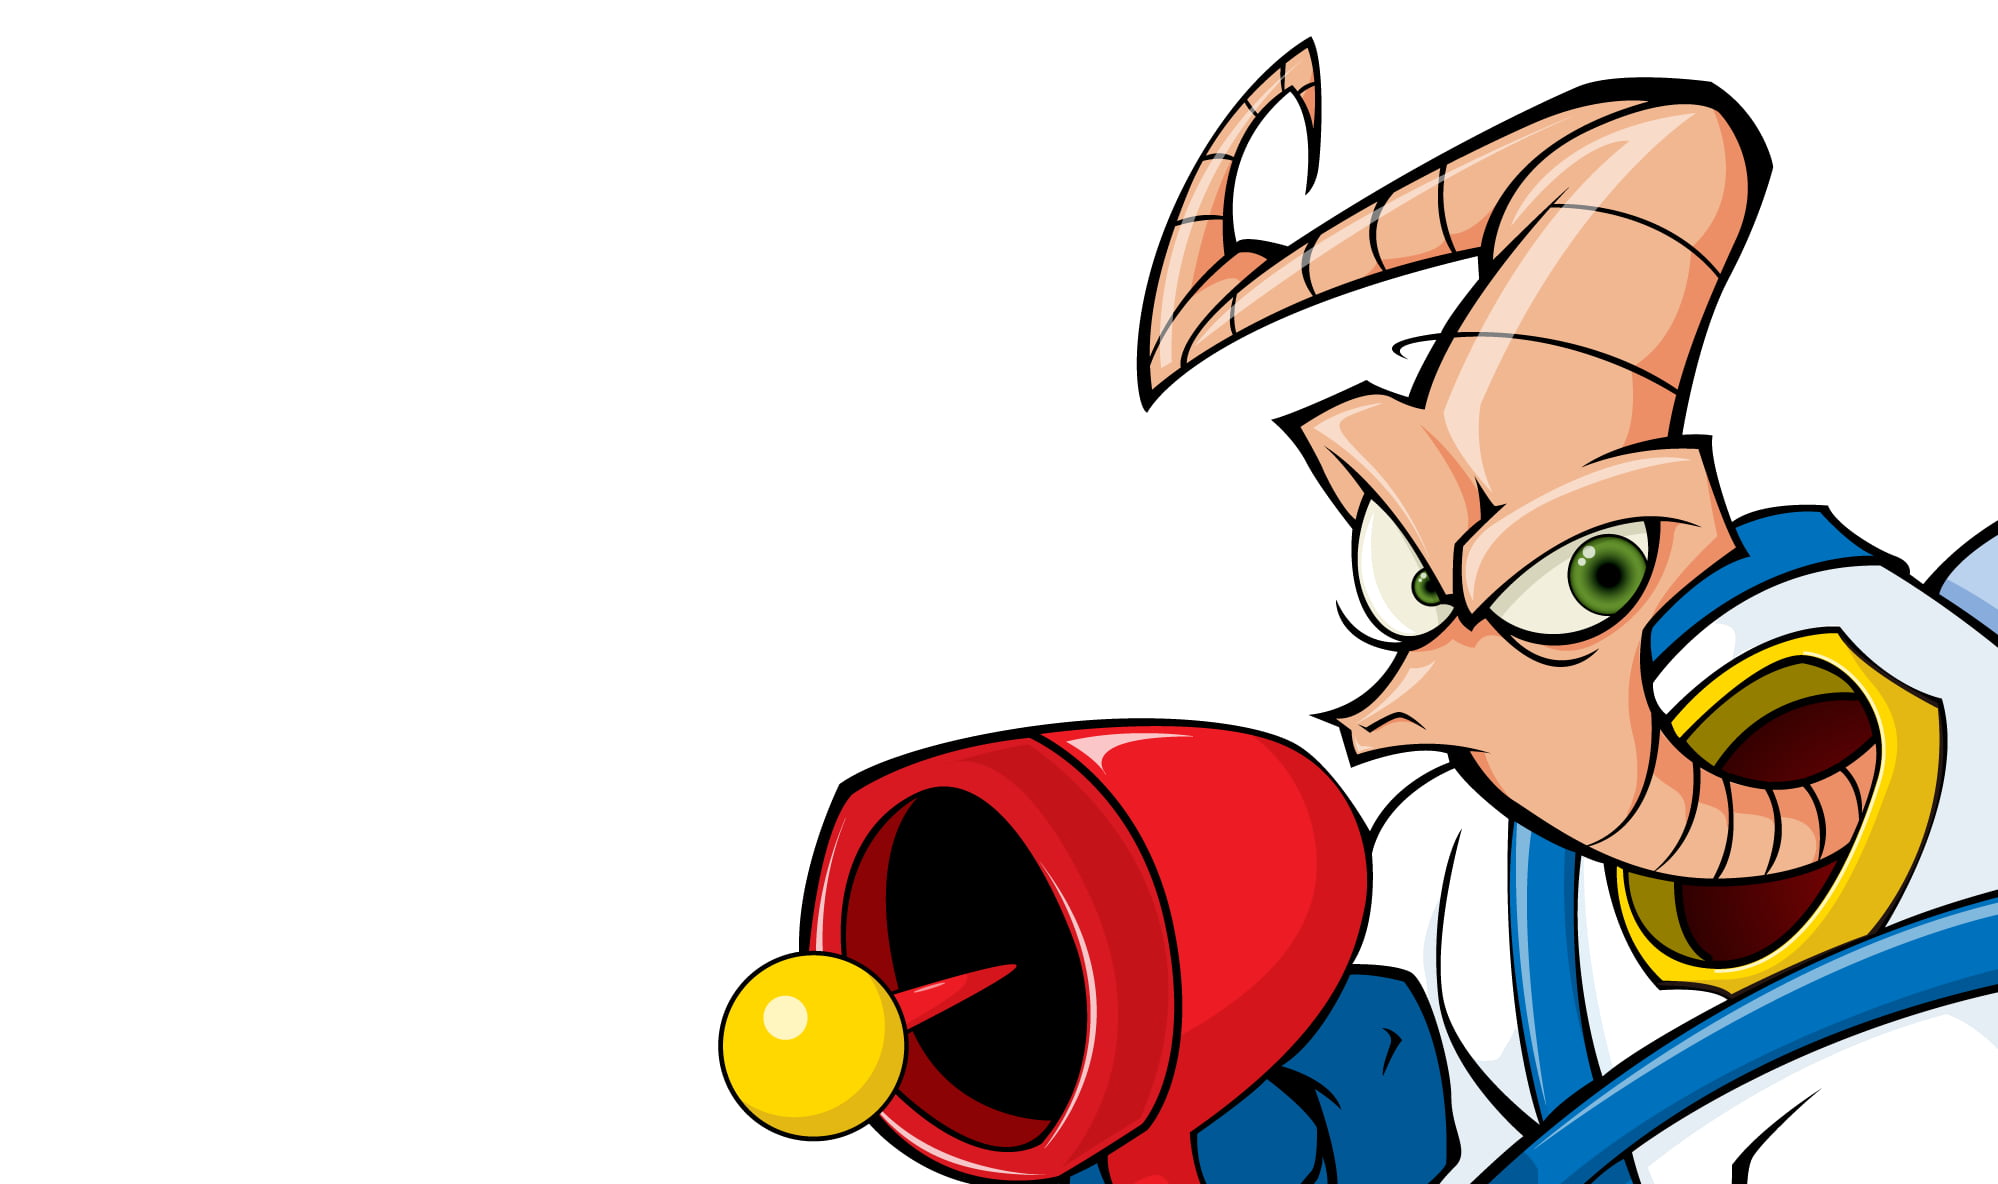 brown cartoon character holding red toy gun, video games, white background, Earthworm Jim, cartoon